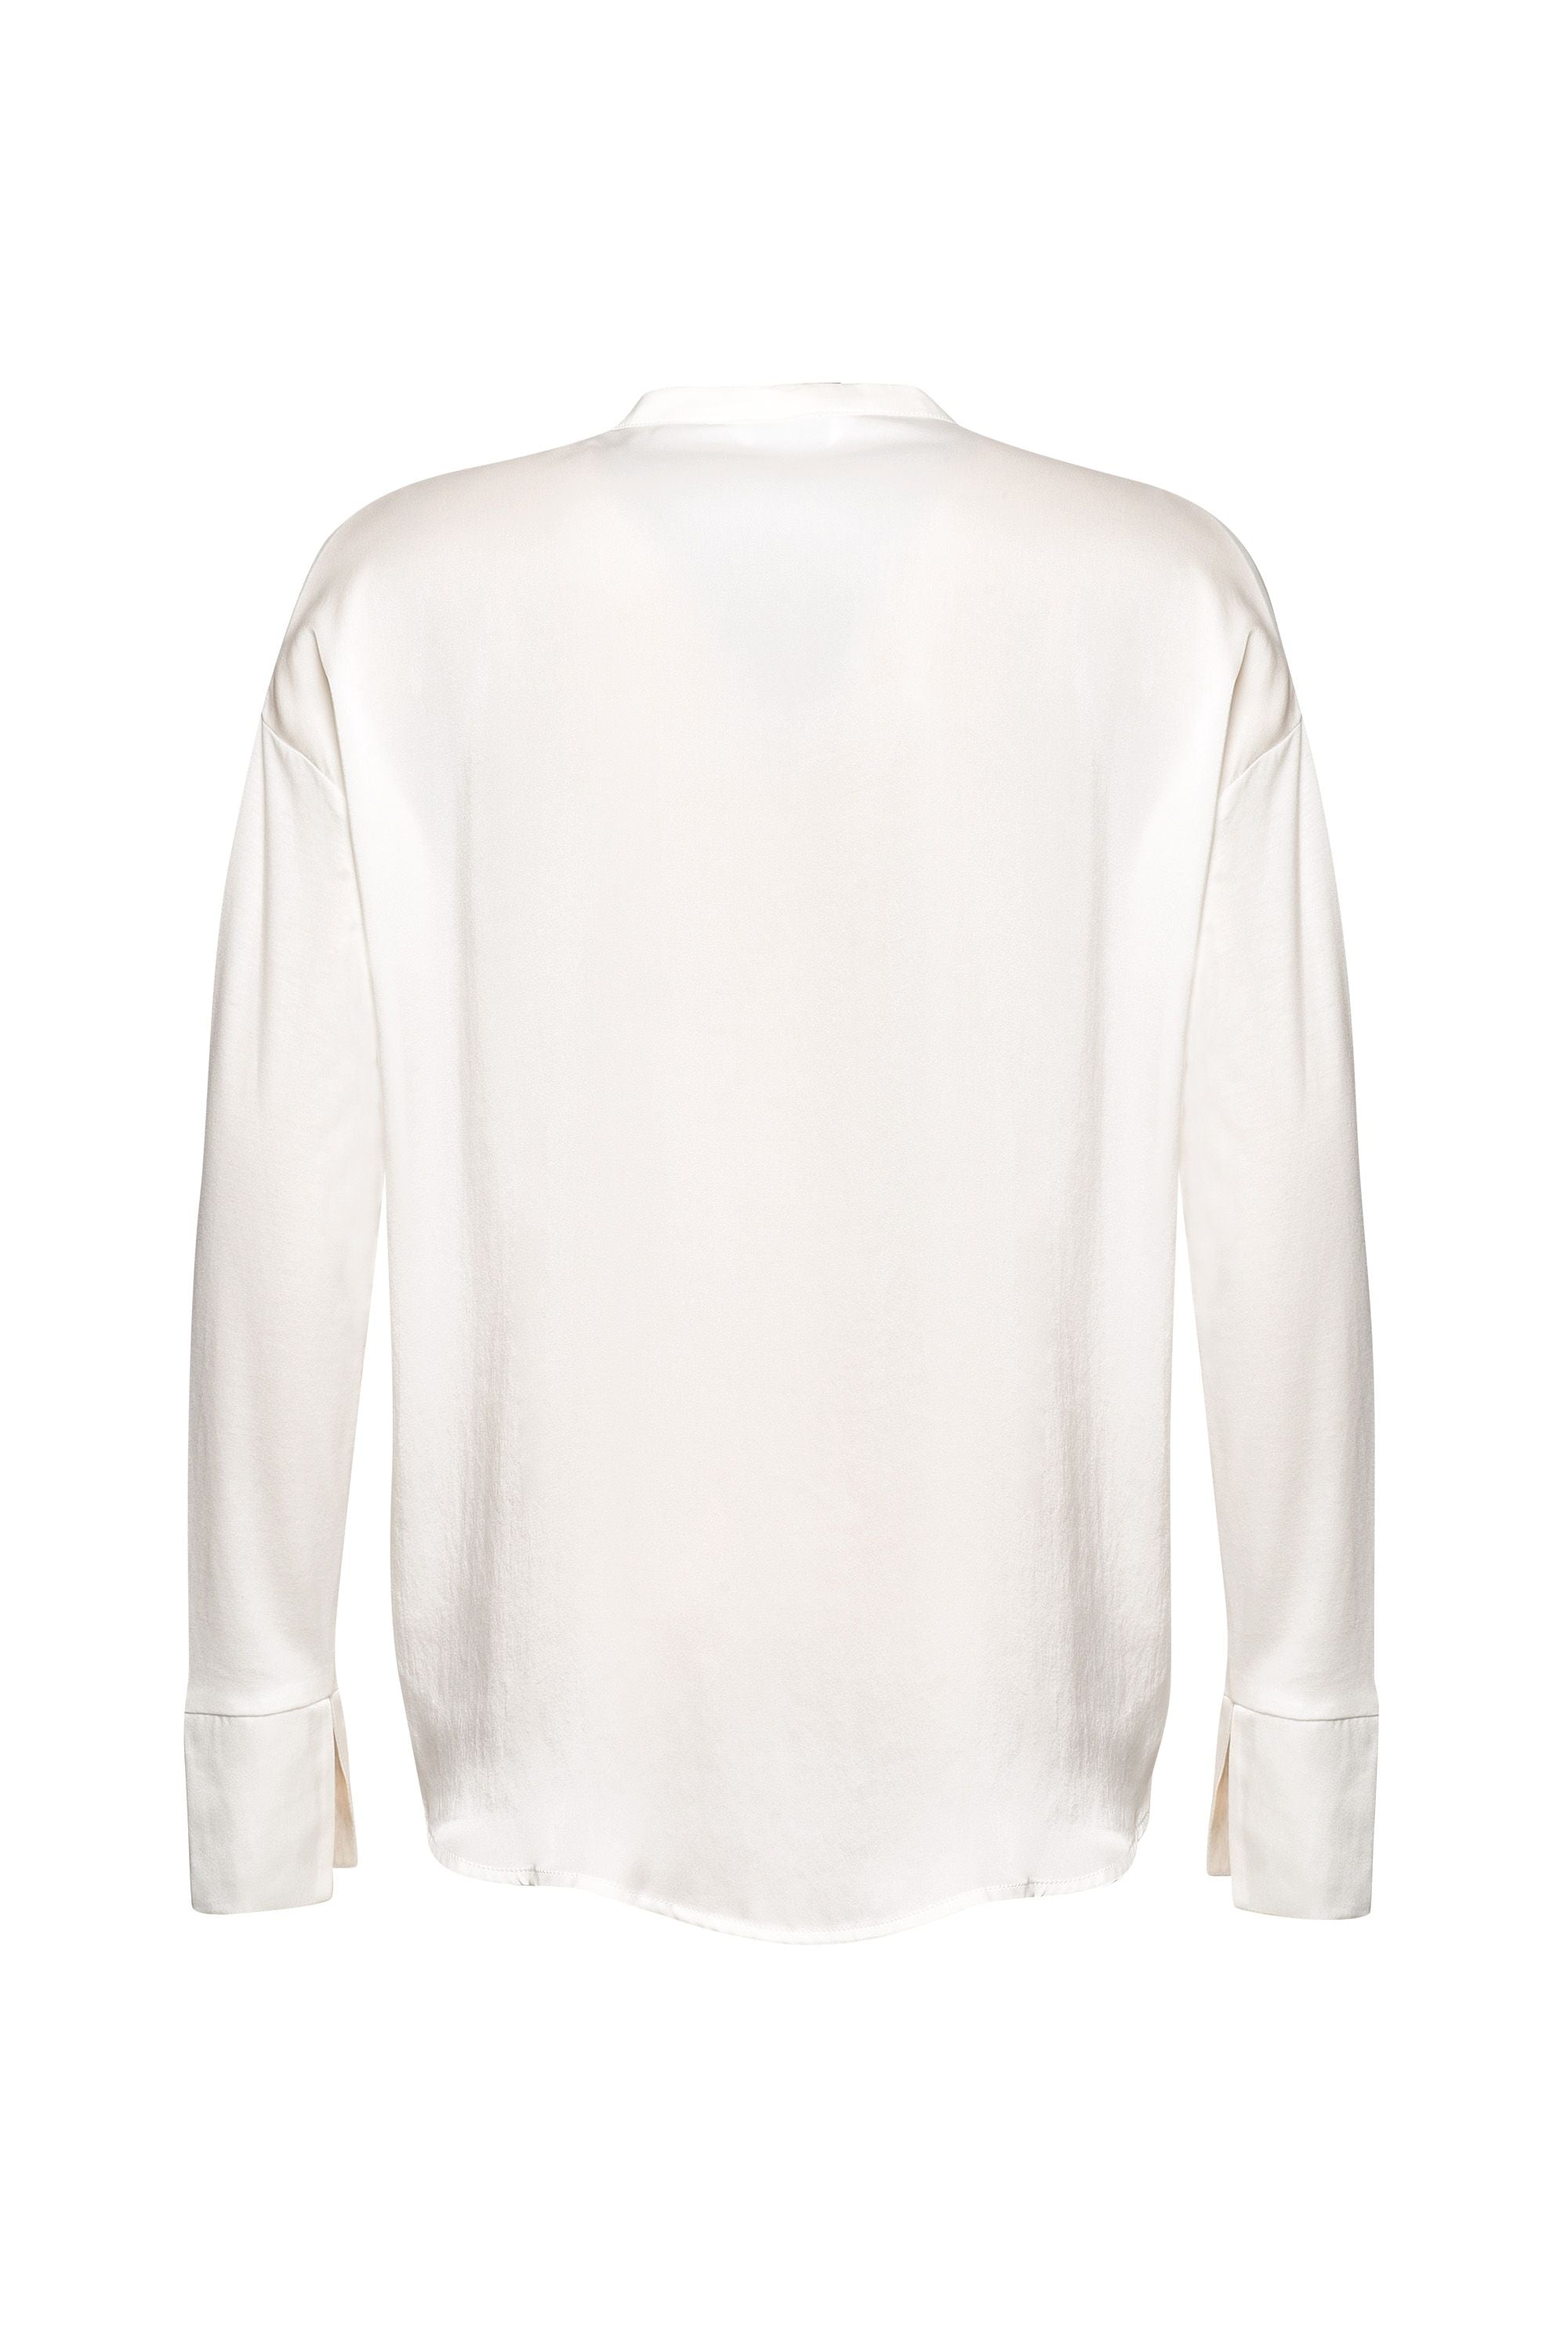 Loobies Story Luxe Top - Silk White